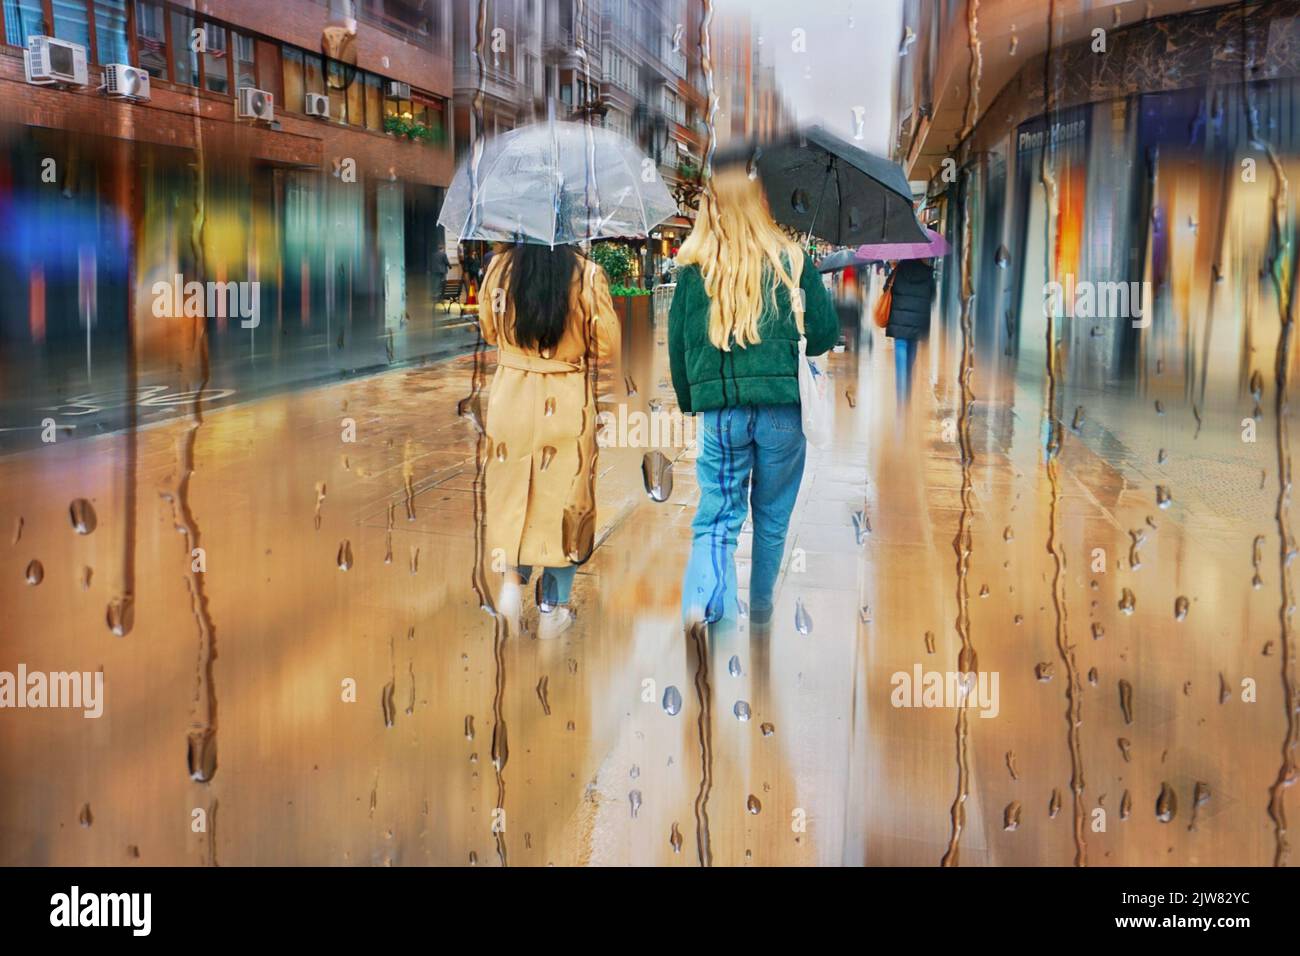 people with an umbrella in rainy days in bilbao city, basque country, spain Stock Photo